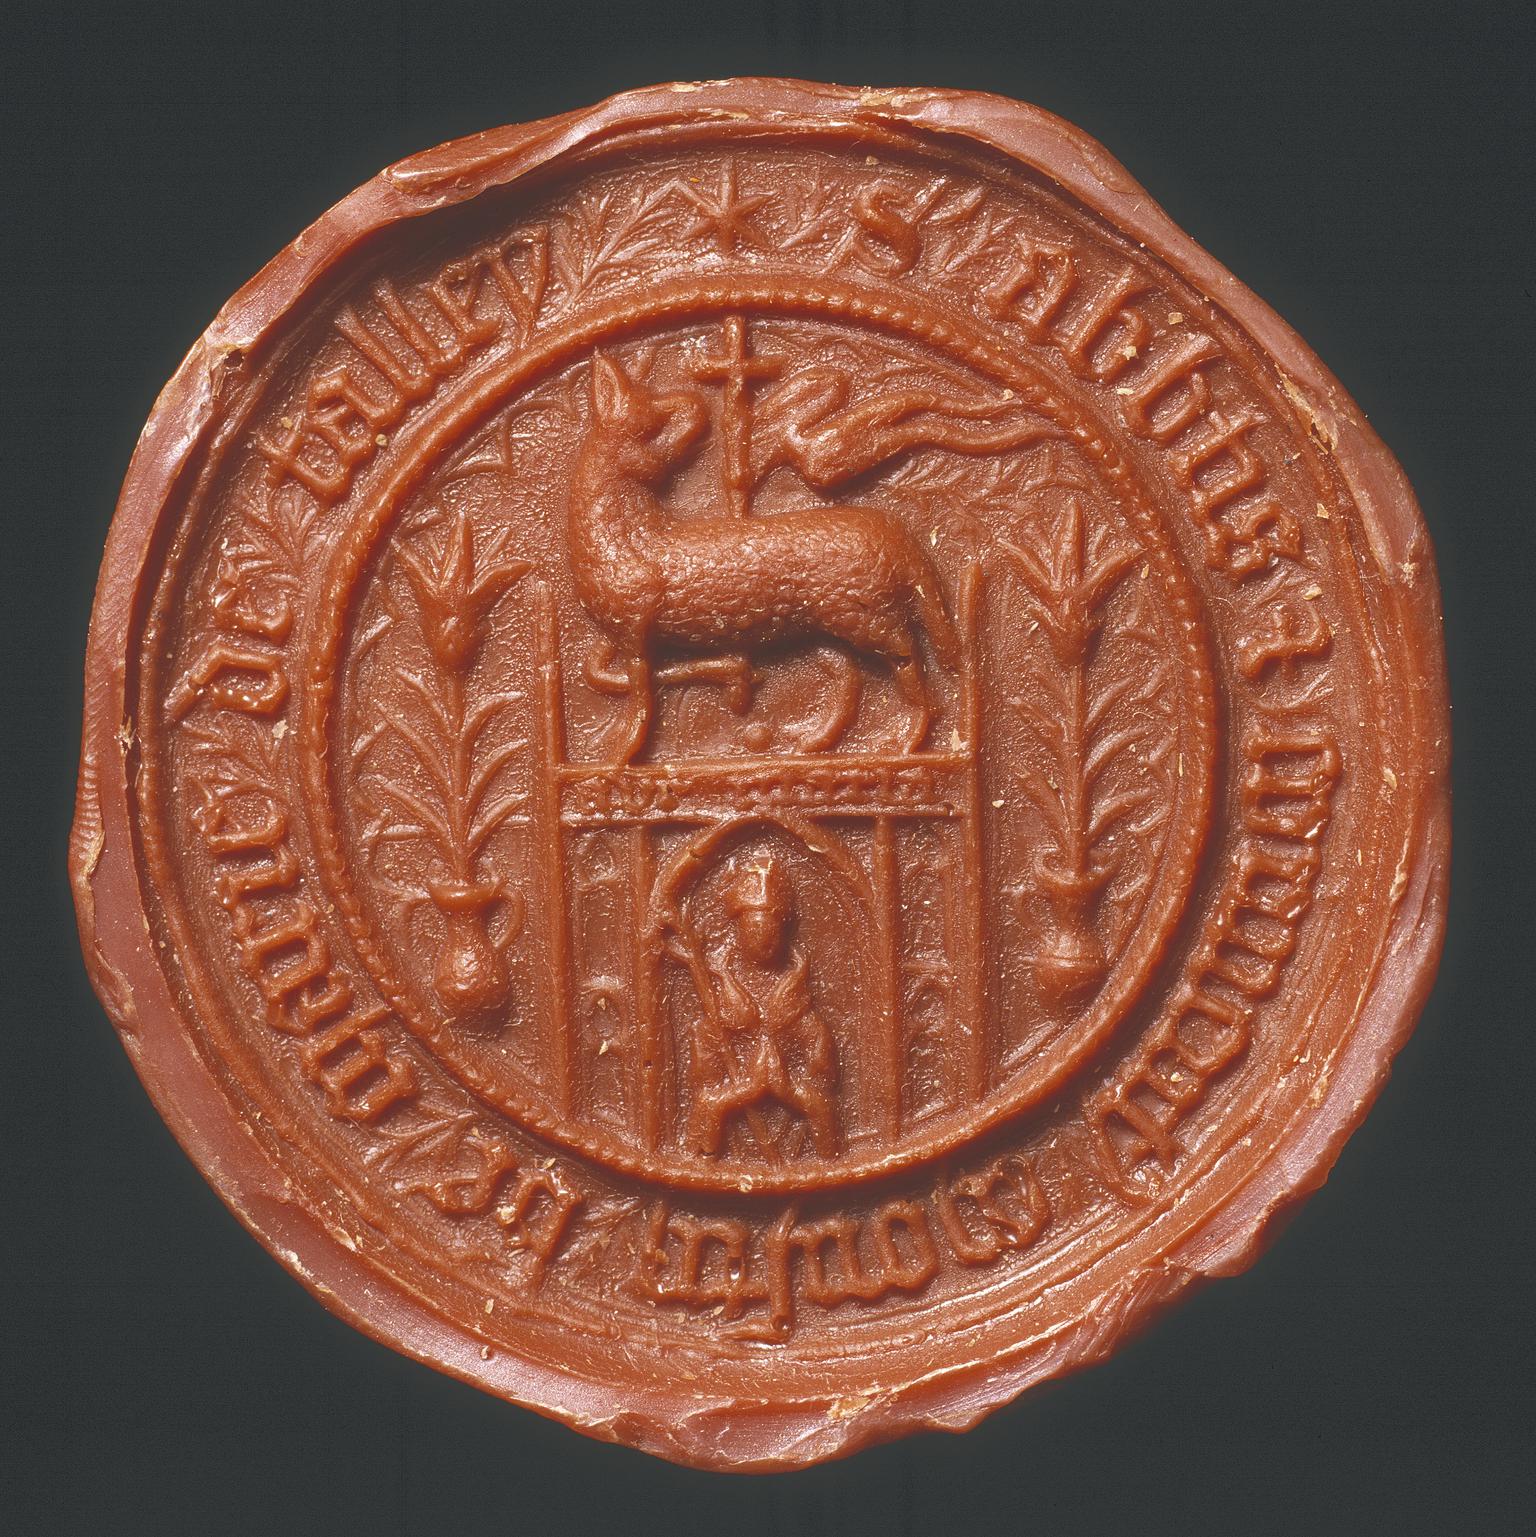 Seal impression: Premonstratensian Abbey, Talley